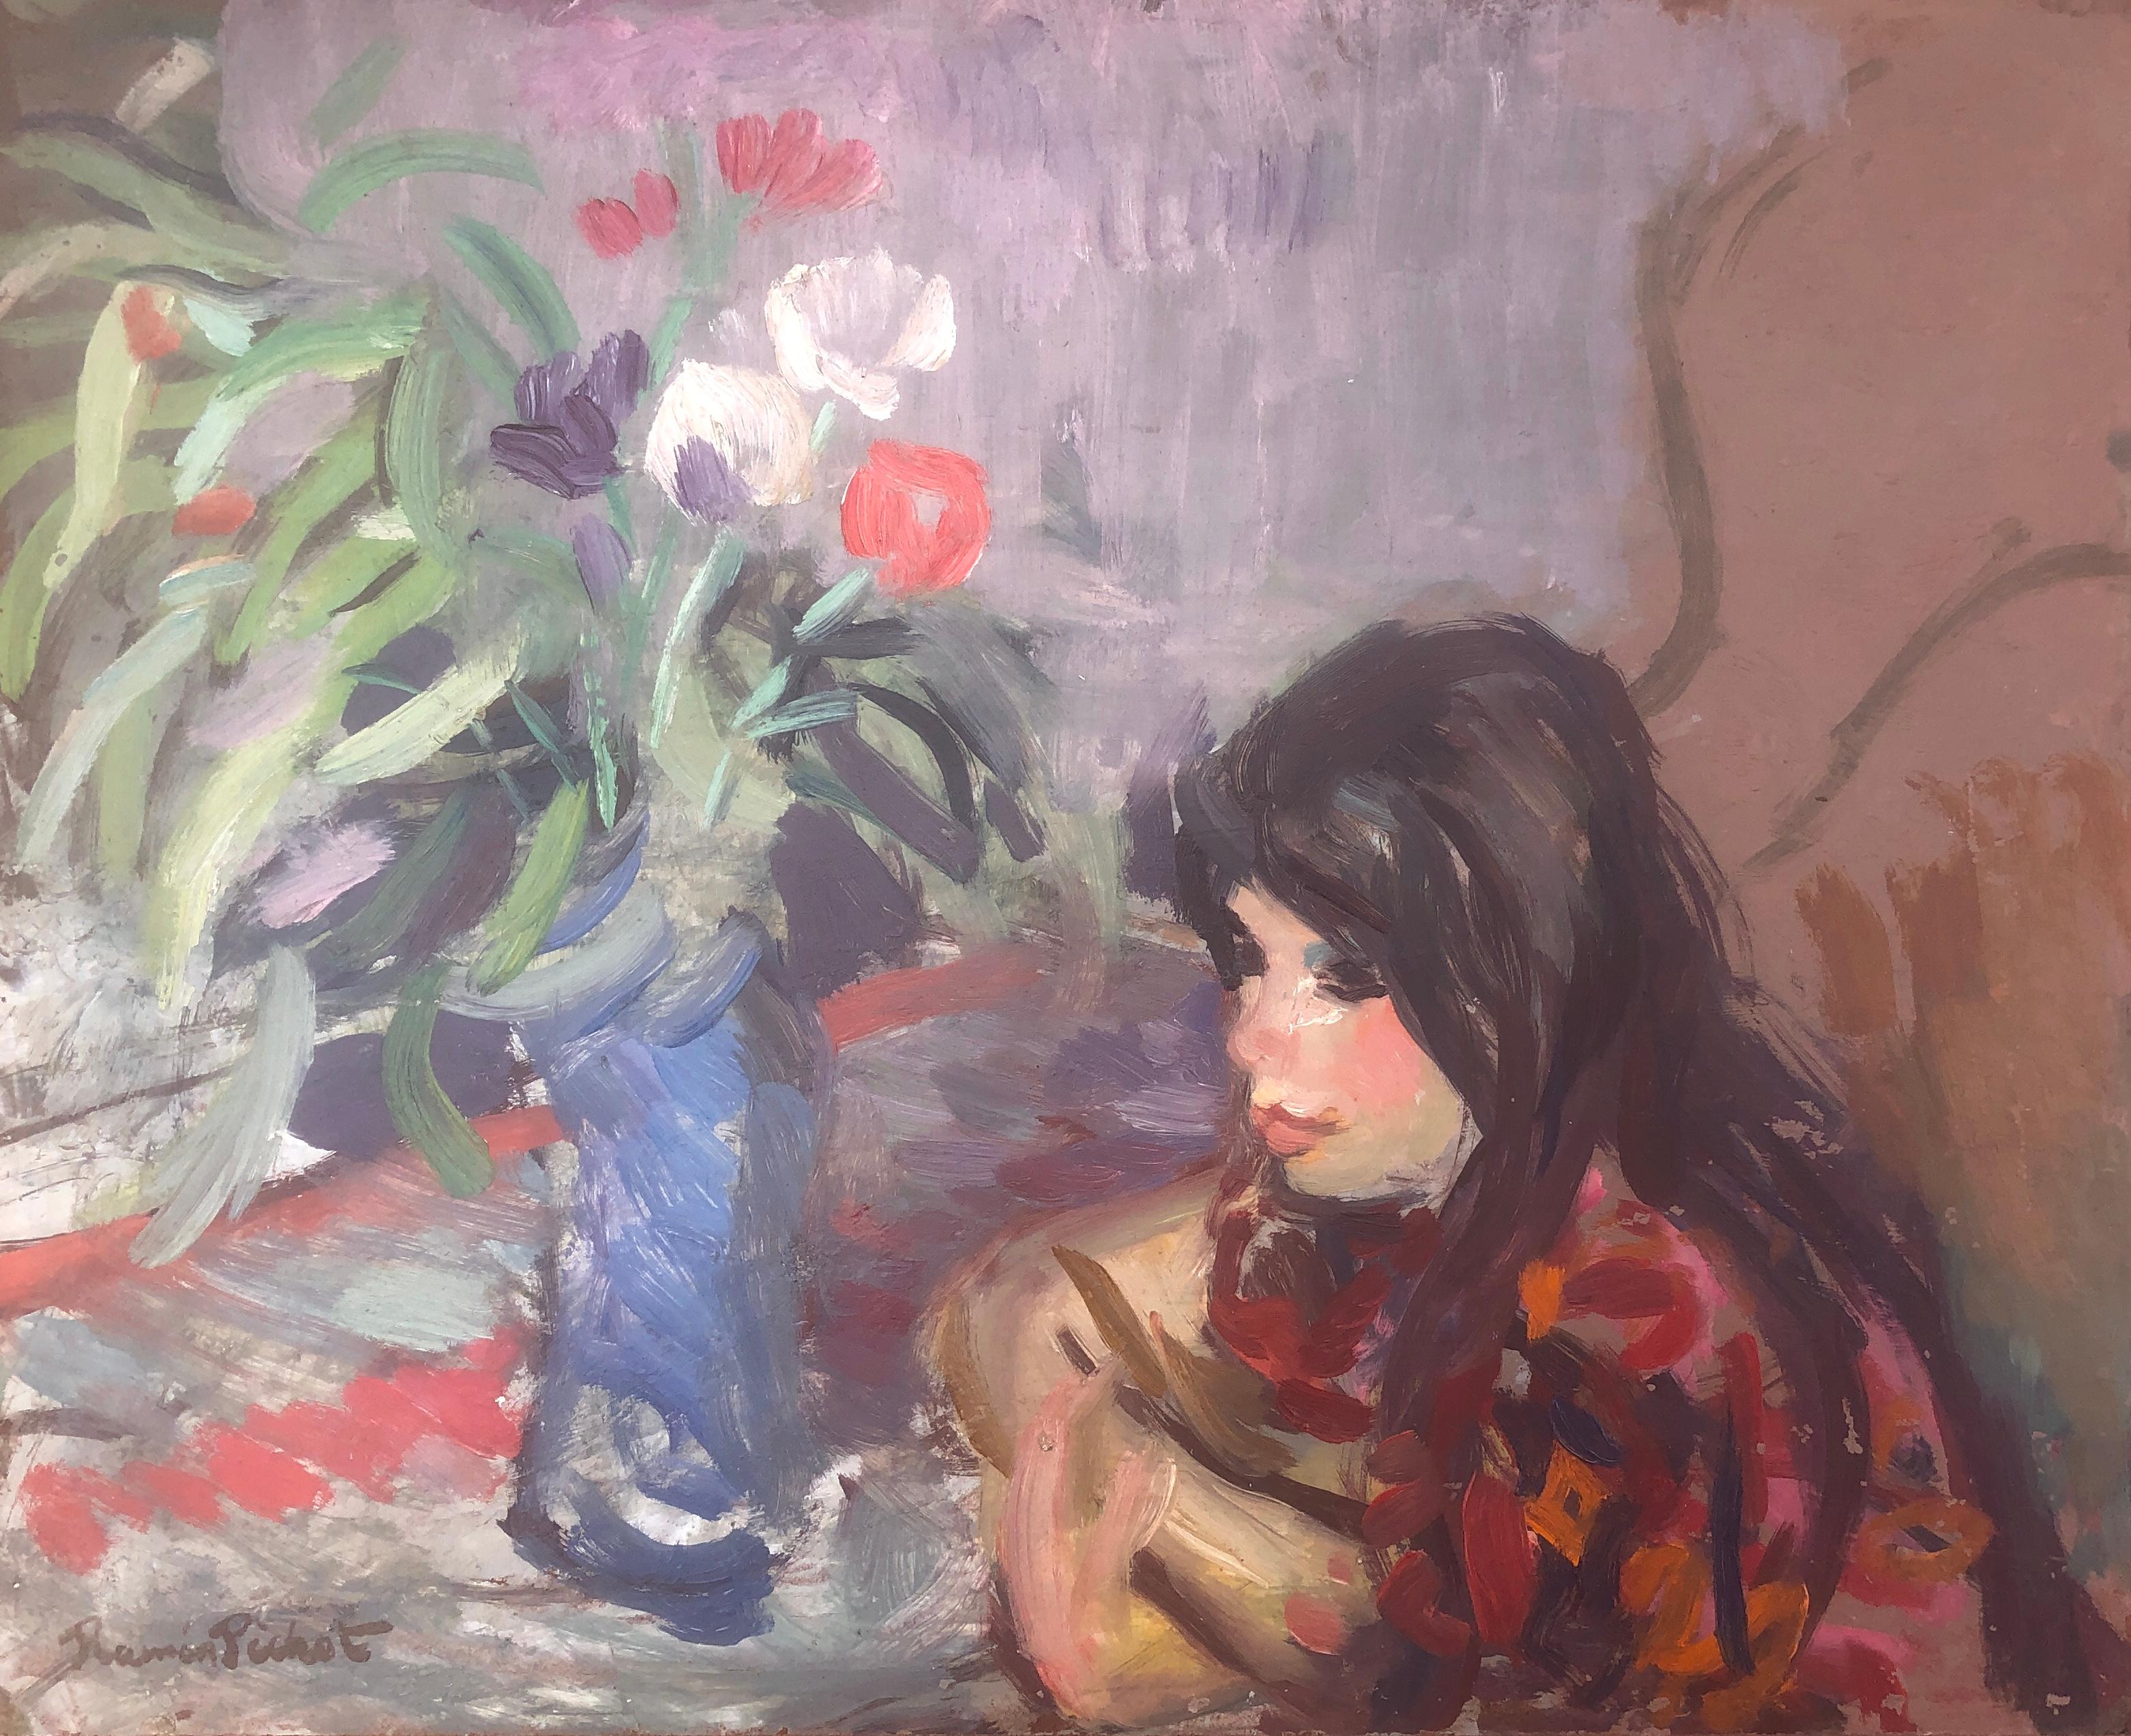 Ramon Pichot i Soler Figurative Painting - Woman and flowers oil on board painting Ramón Pichot